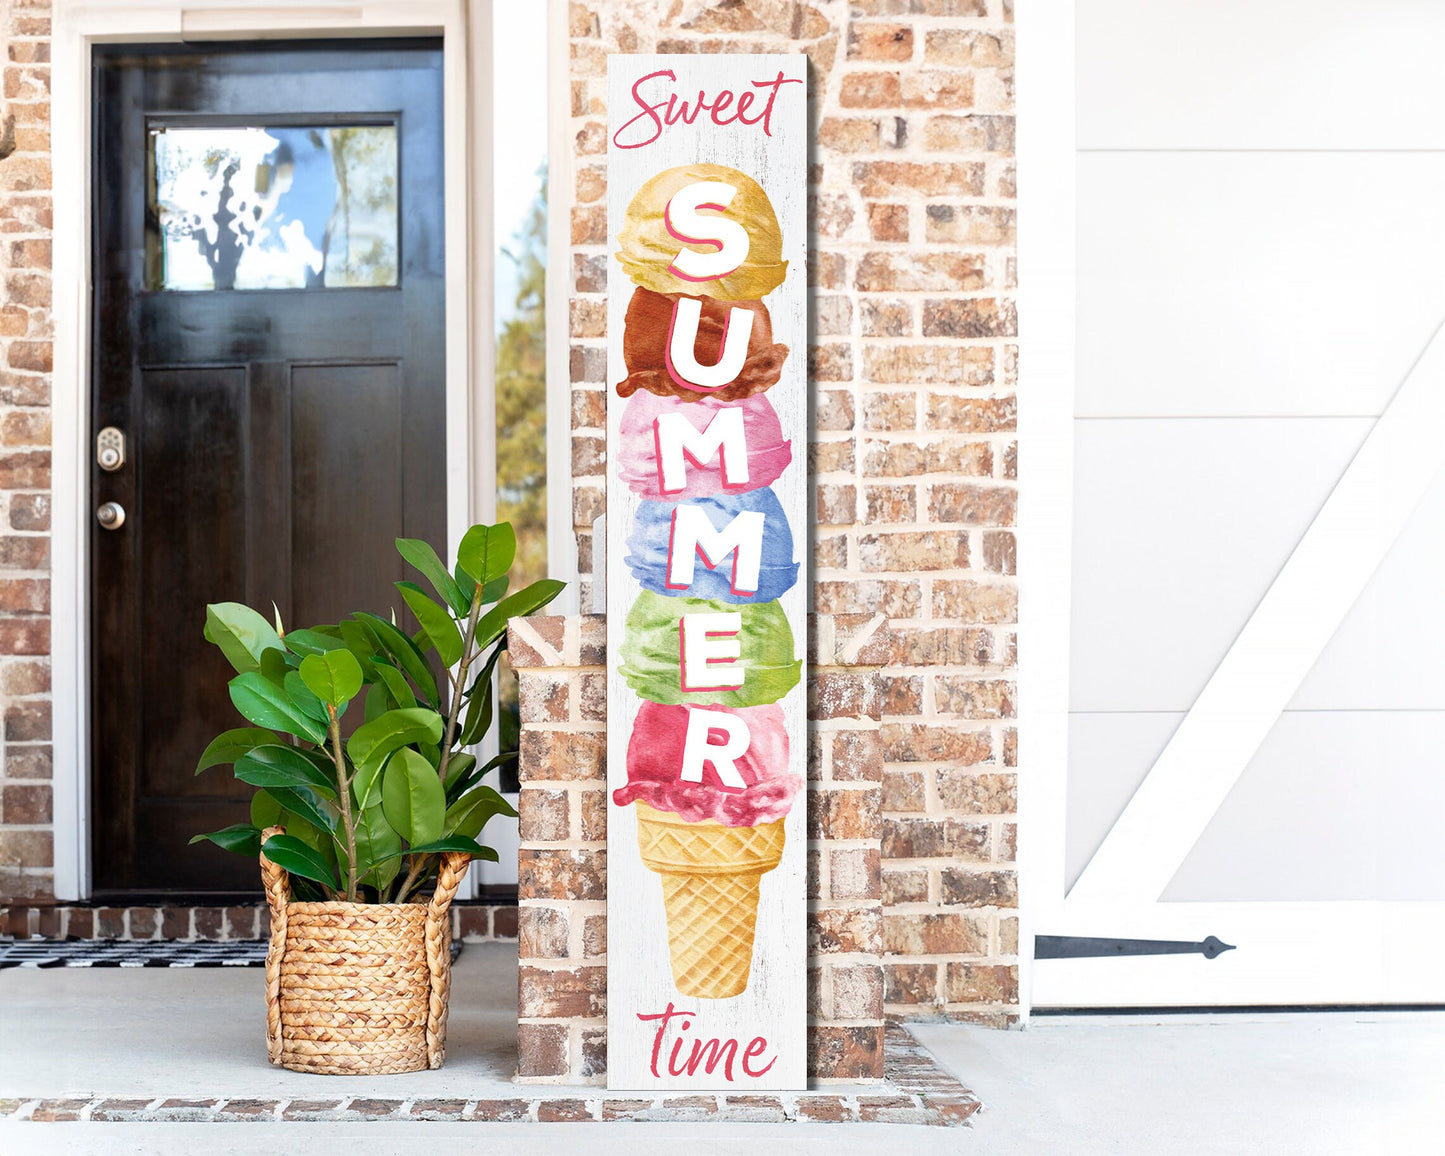 48in Sweet Summer Time Ice Cream Porch Sign - Wooden Front Door Wall Decor for Home - Fun & Colorful Seasonal Design